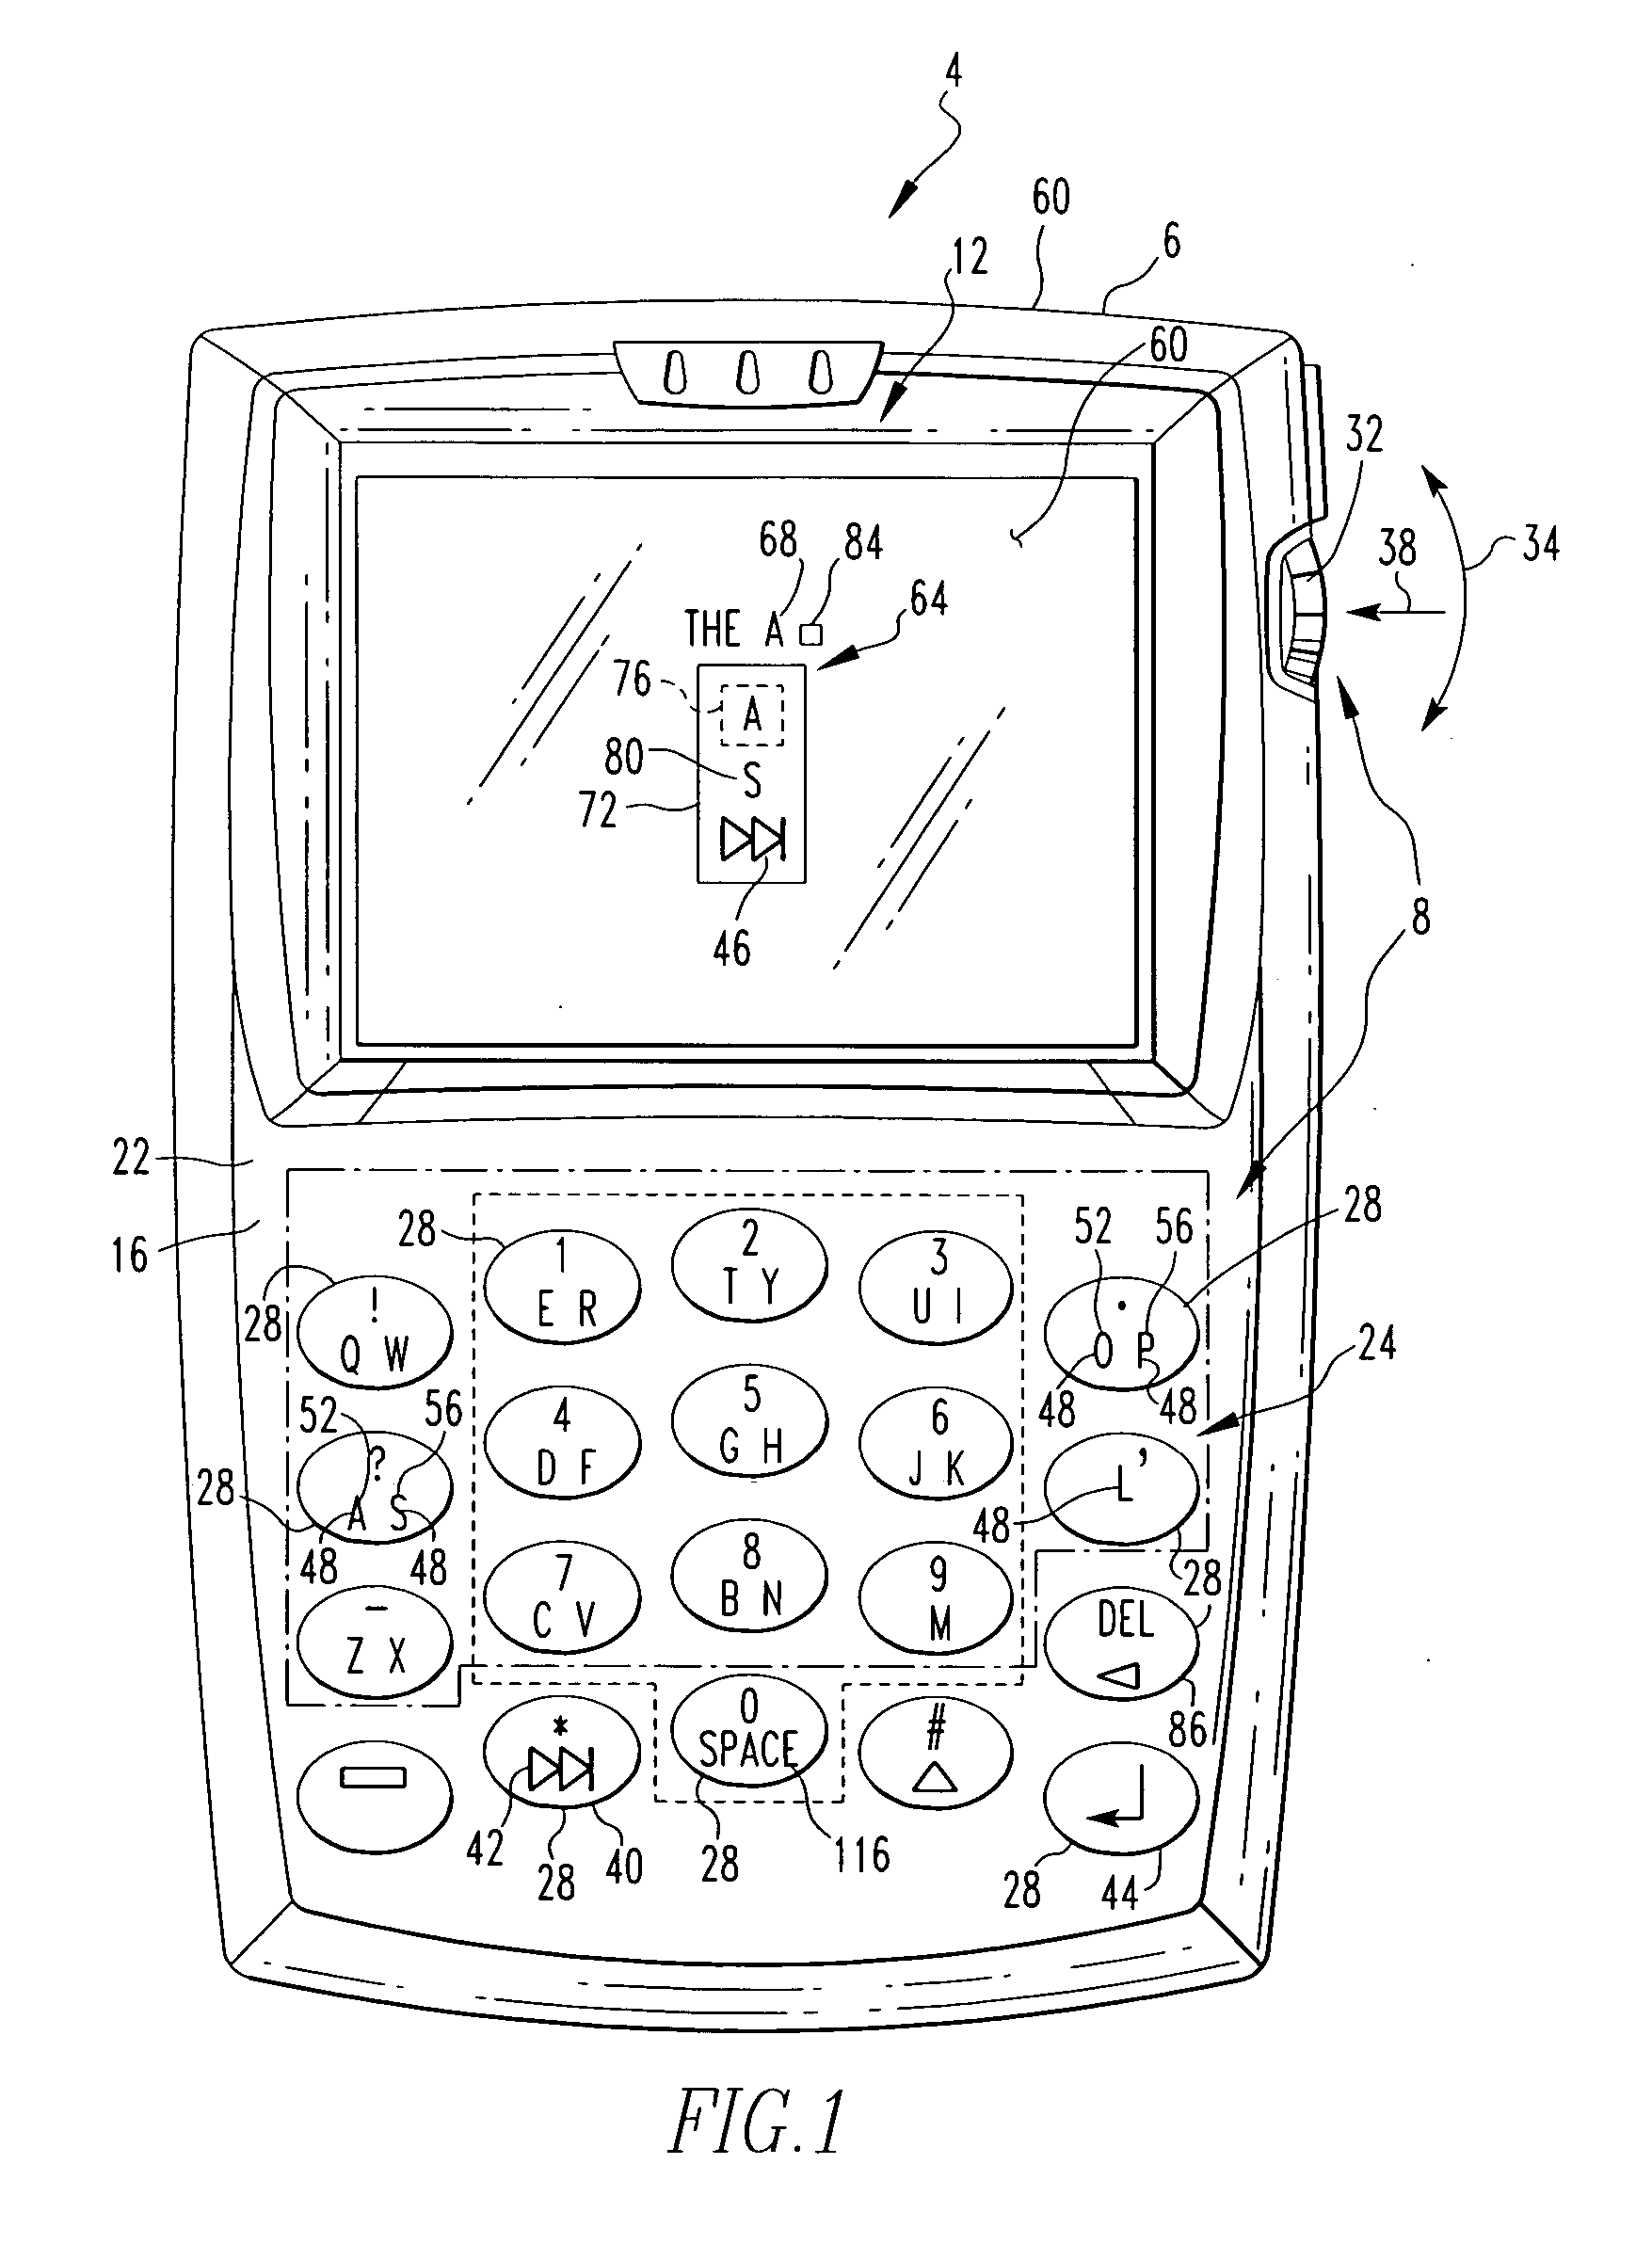 Handheld electronic device with text disambiguation employing advanced text case feature